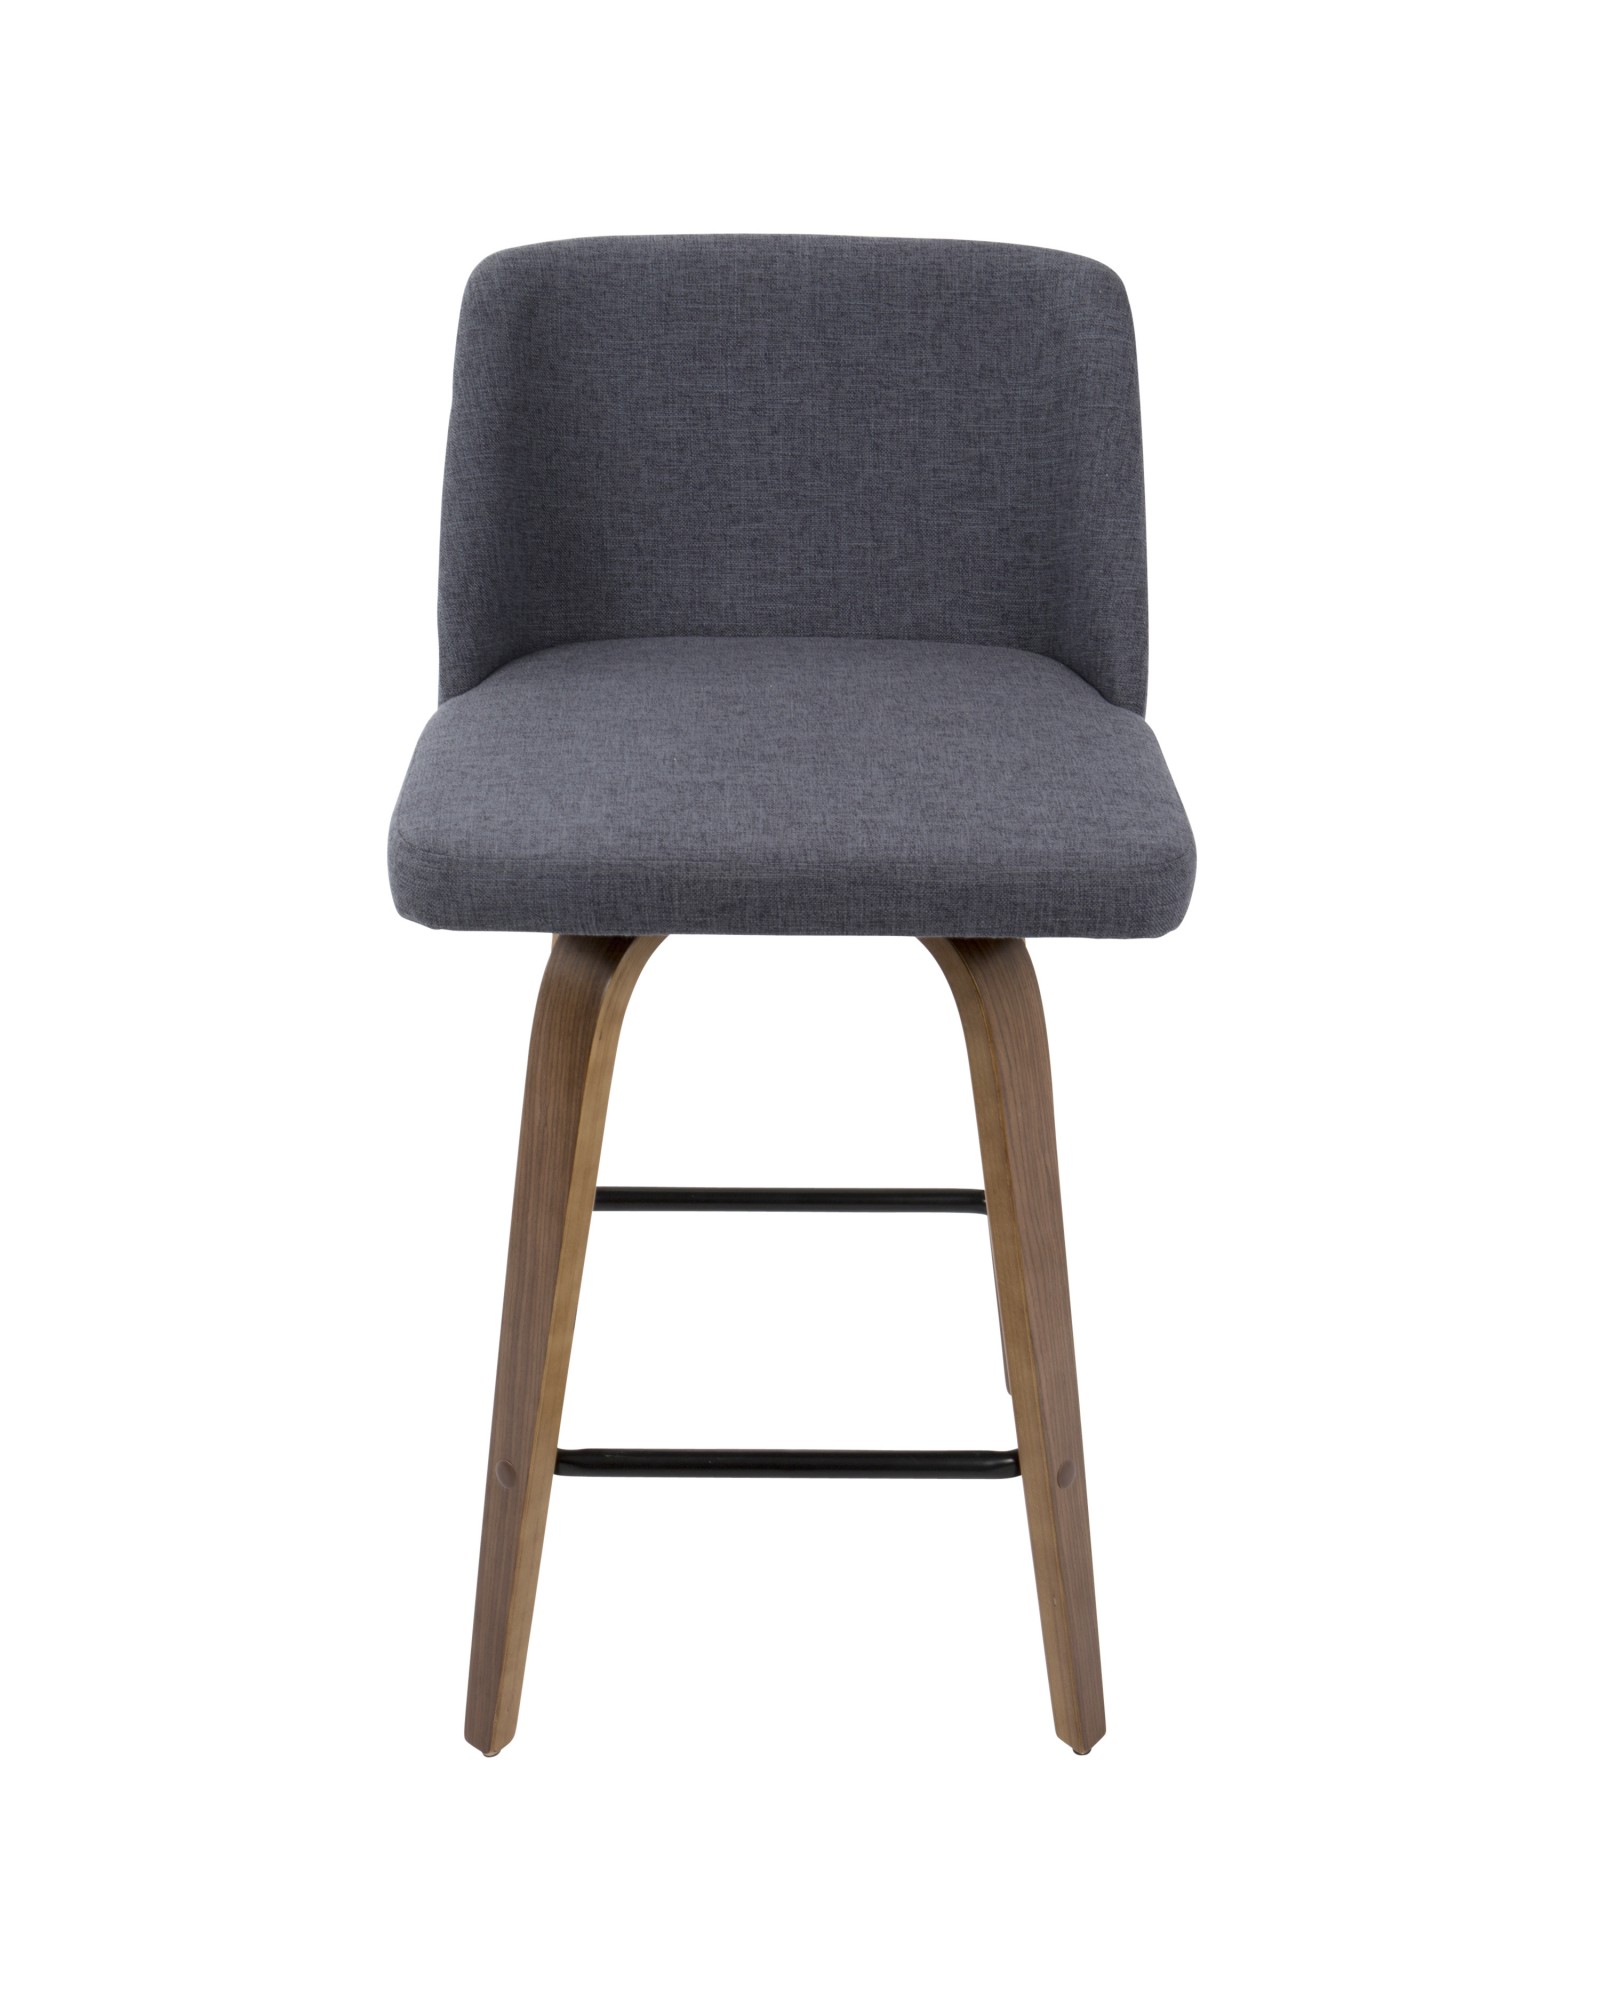 Toriano Mid-Century Modern Counter Stool in Walnut and Blue Fabric